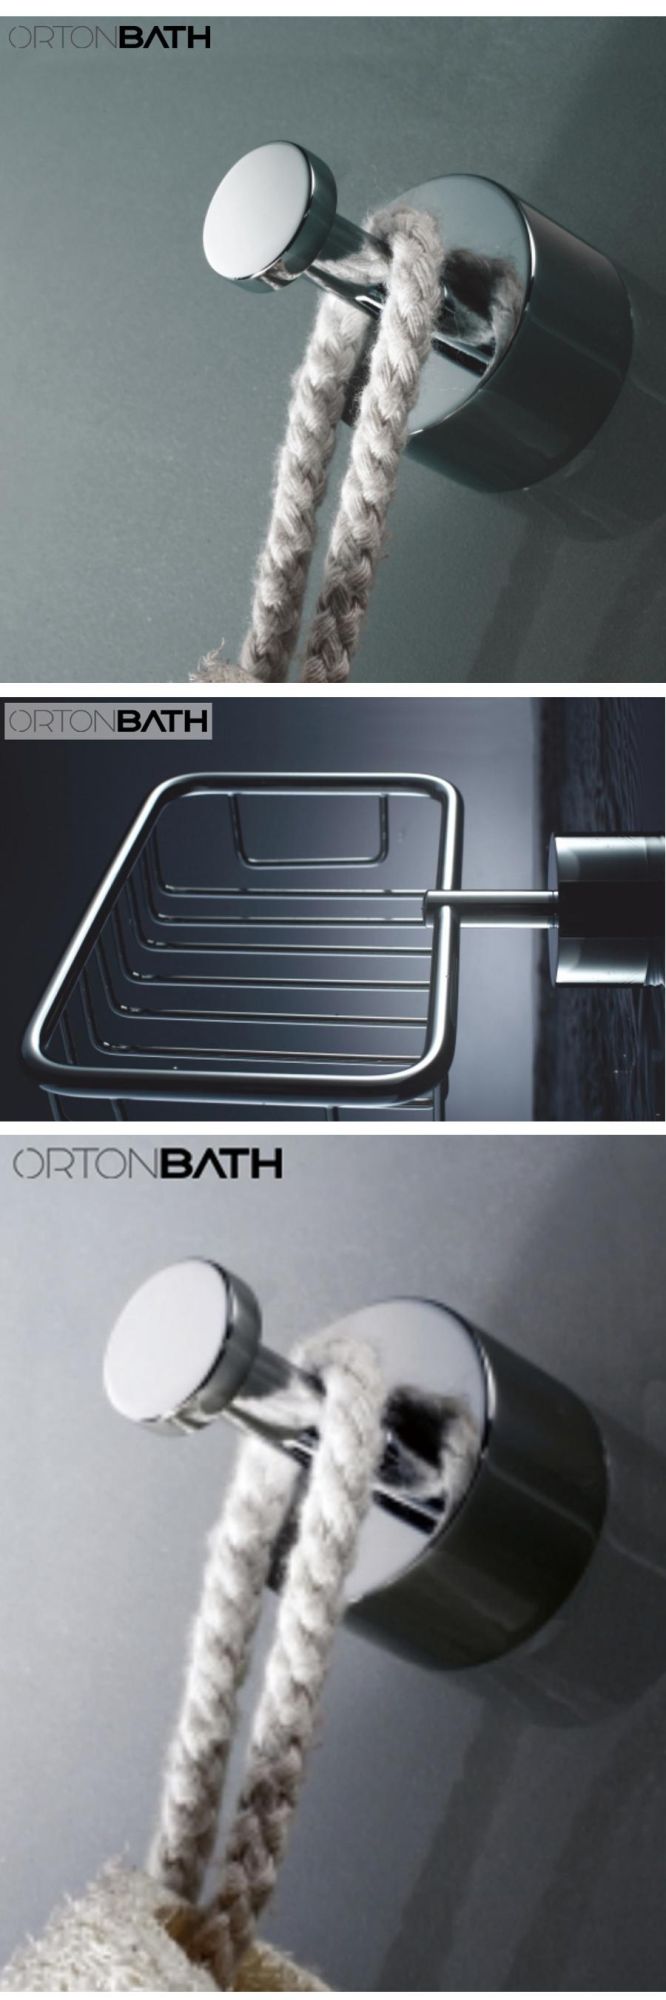 Bathroom Fittings Round Aluminum Brass Stainless Steel Base Bathroom Accessories with Robe Hook Soap Basket Glass Shelf Toilet Brush